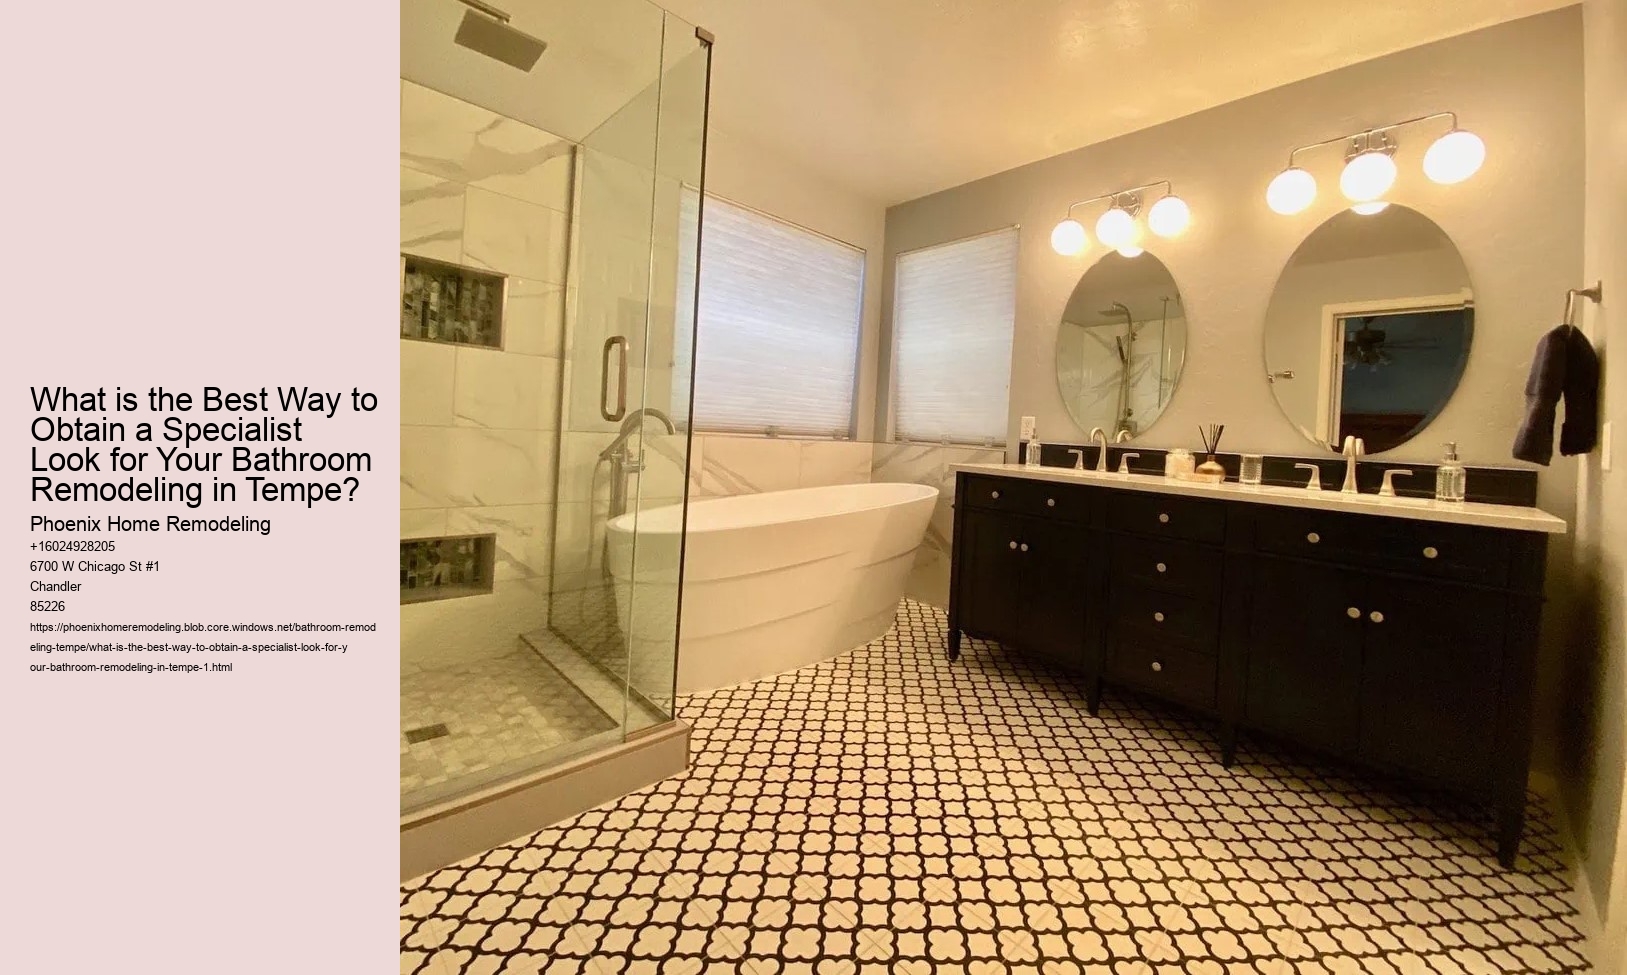 What is the Best Way to Obtain a Specialist Look for Your Bathroom Remodeling in Tempe?